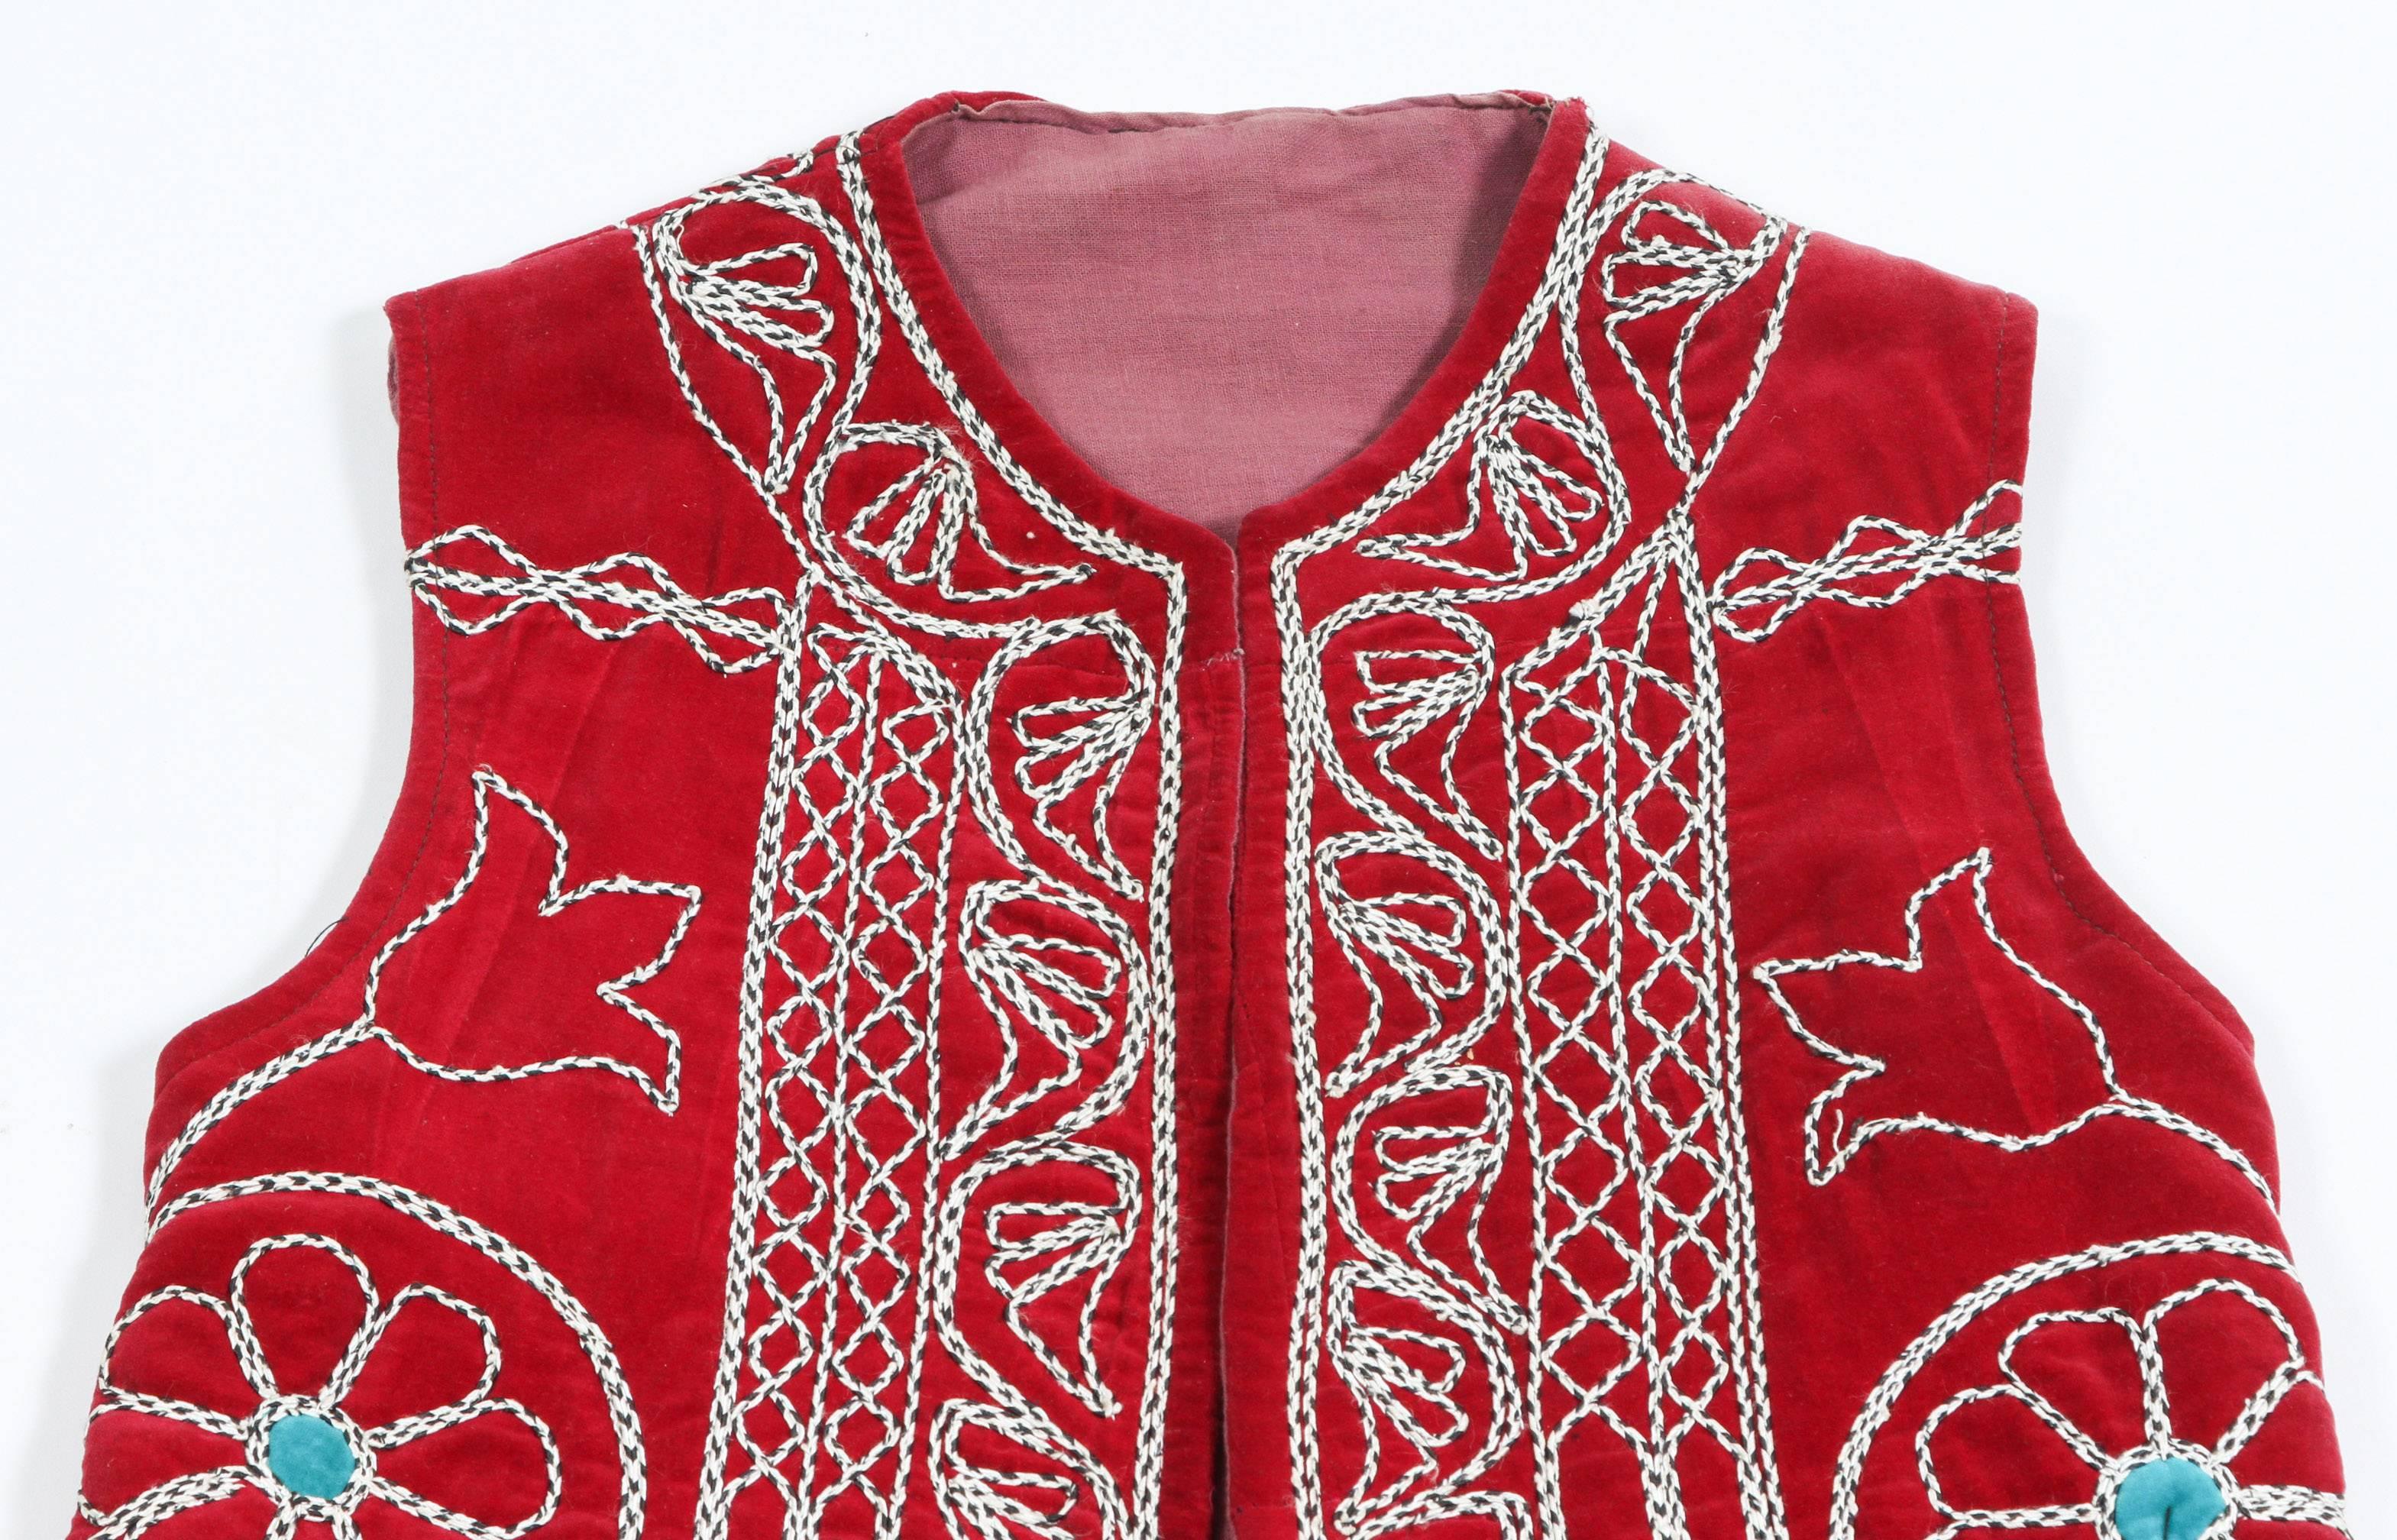 Elegant Turkish long vest brightly colored design of geometric patterns against a red ground.
Part of Turkish folk ceremonial traditional costume.
The designs on the open jacket are embroidered with white threads, flowers and elaborate geometric